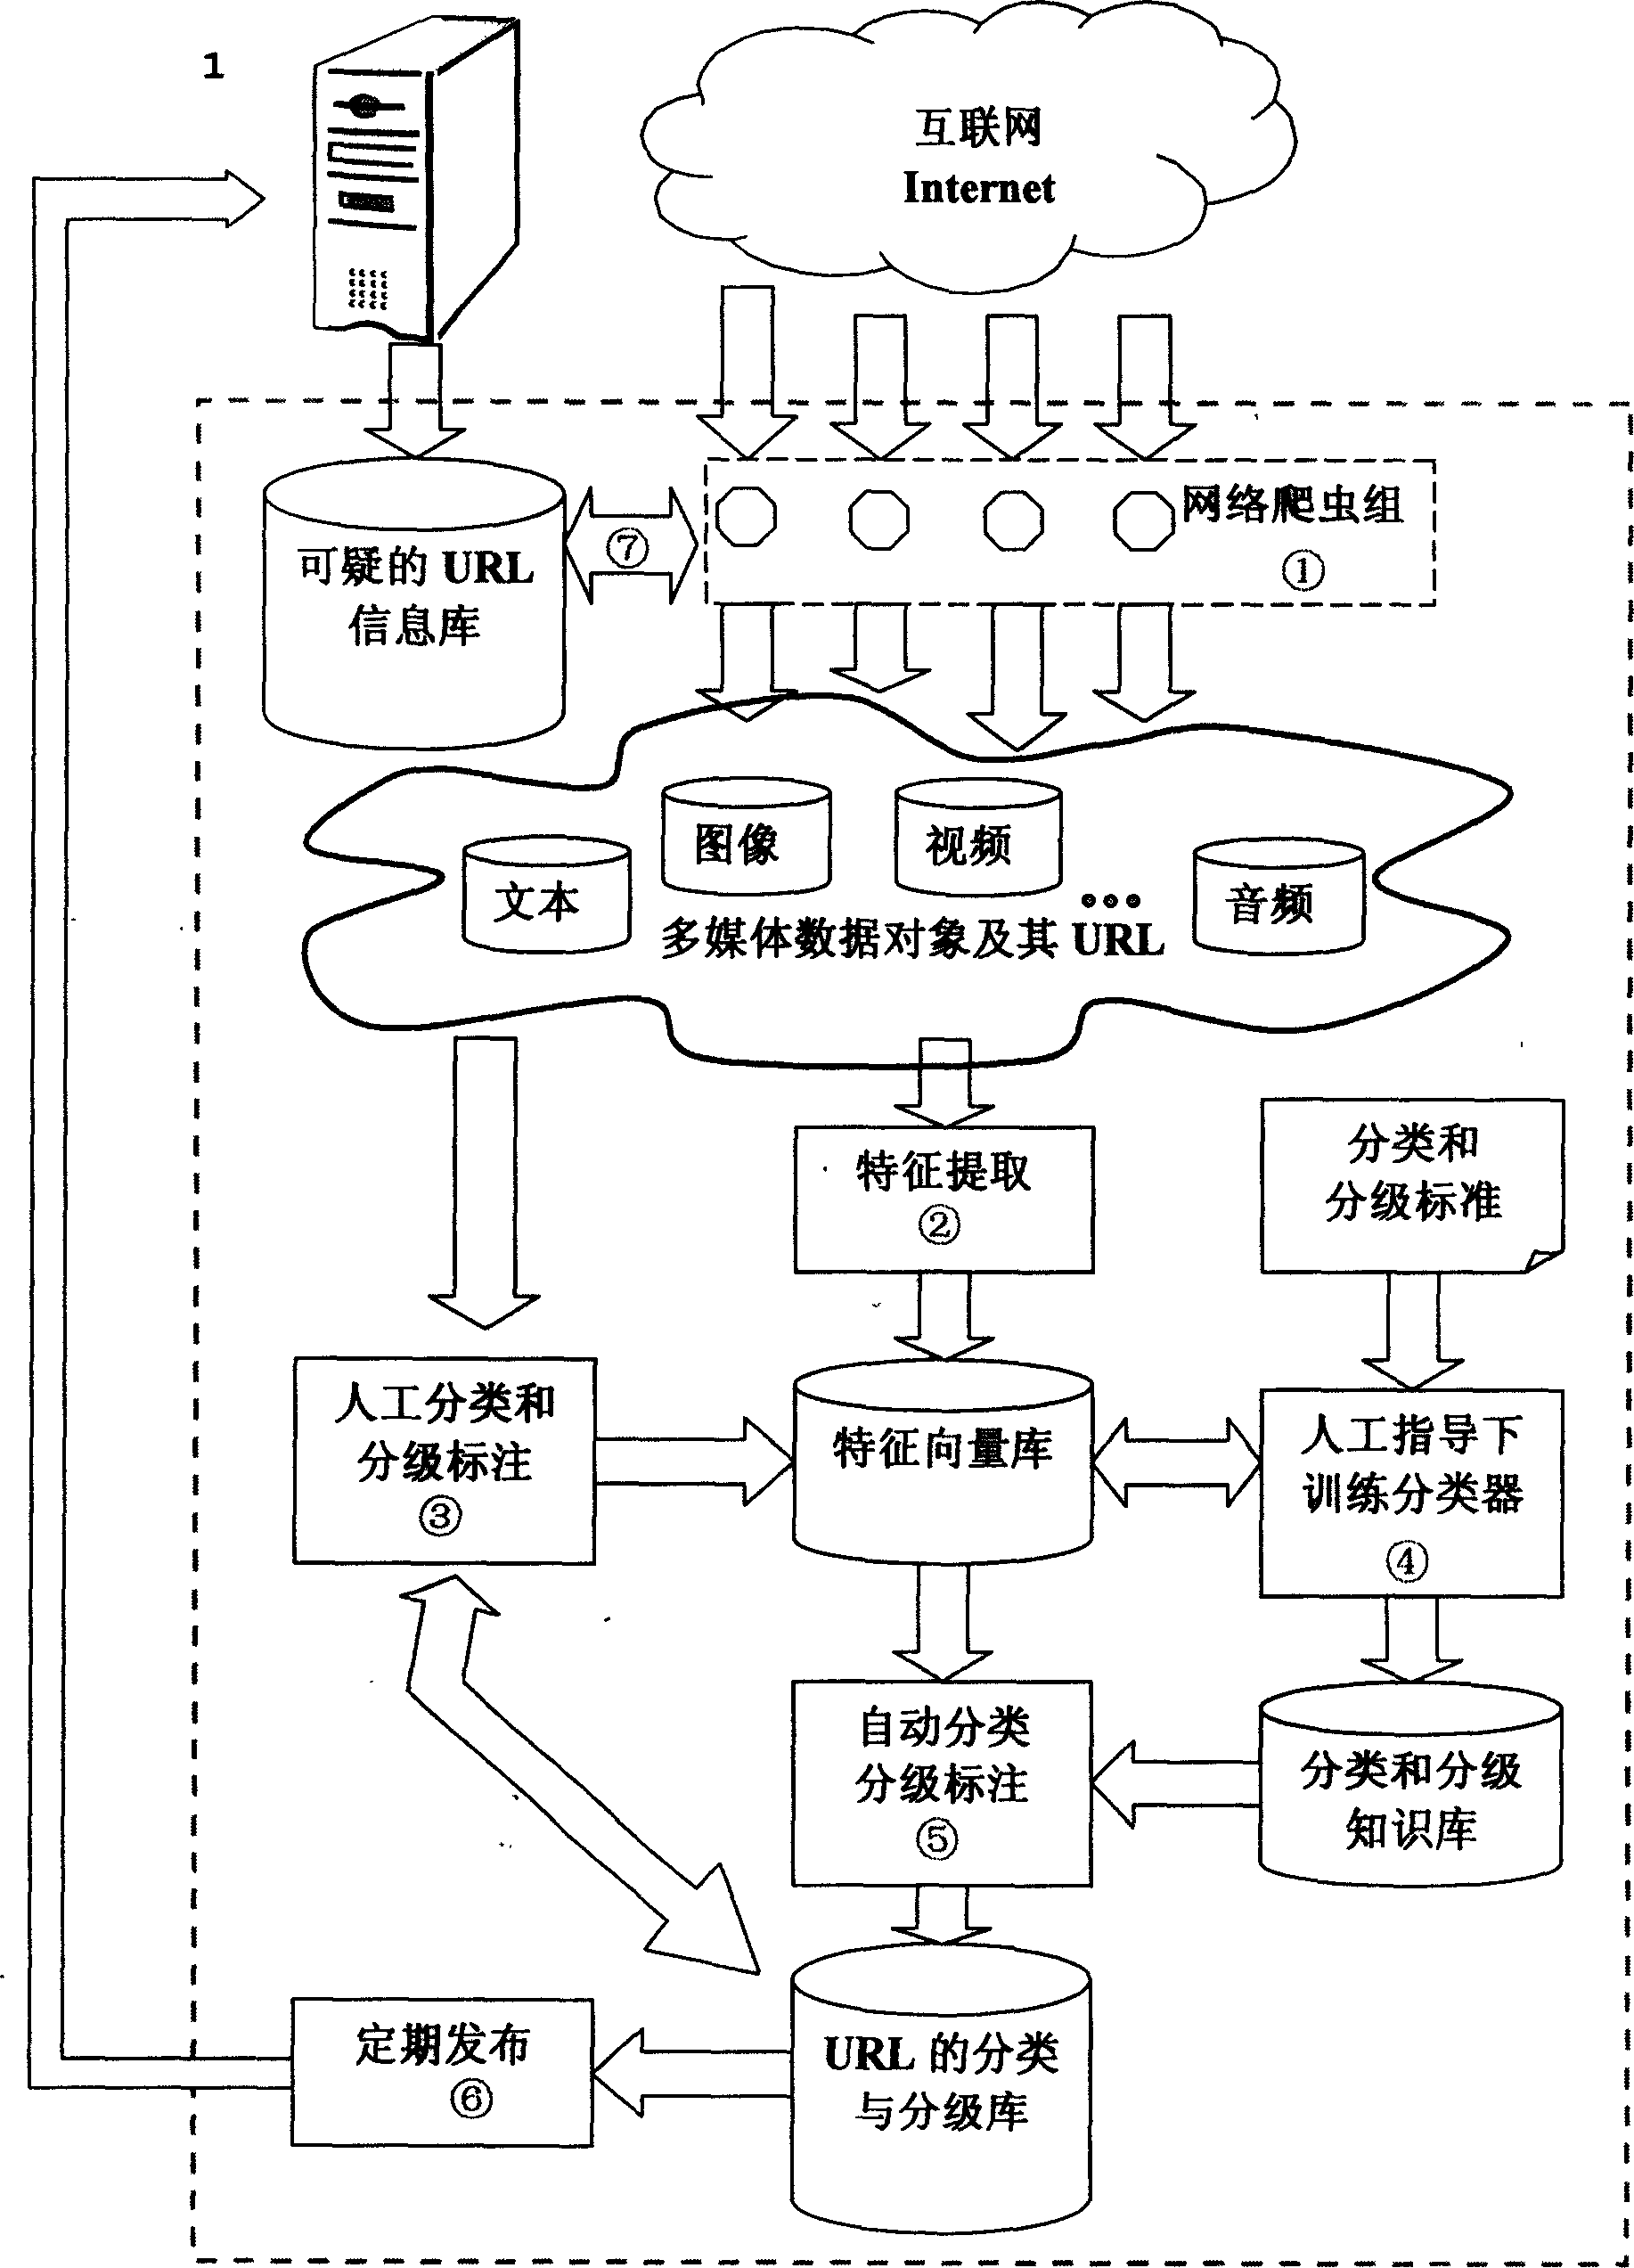 Internet content filtering system and method